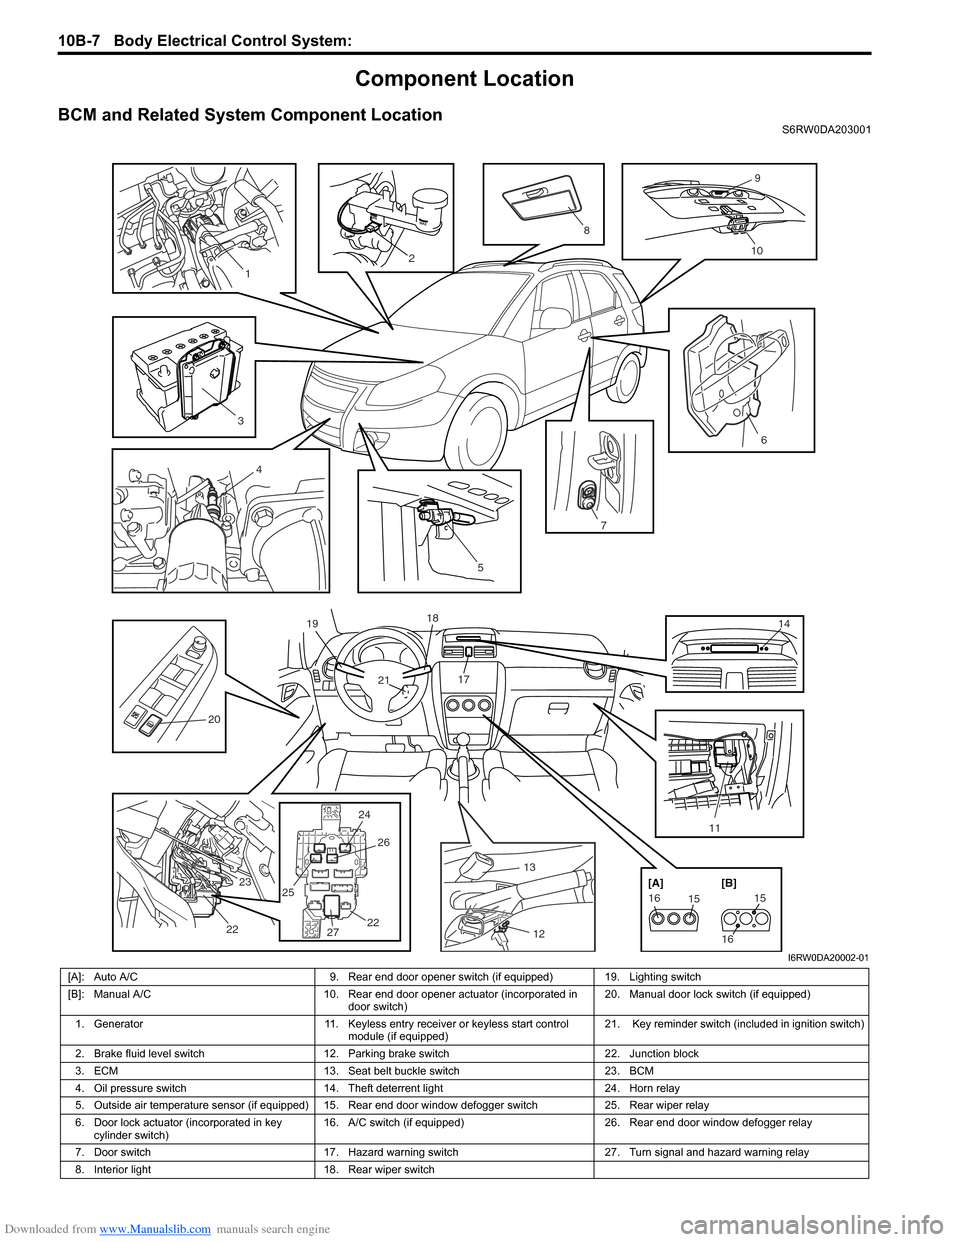 SUZUKI SX4 2006 1.G Service Workshop Manual Downloaded from www.Manualslib.com manuals search engine 10B-7 Body Electrical Control System: 
Component Location
BCM and Related System Component LocationS6RW0DA203001
13
12 17 18
21 19
14
24 25
252